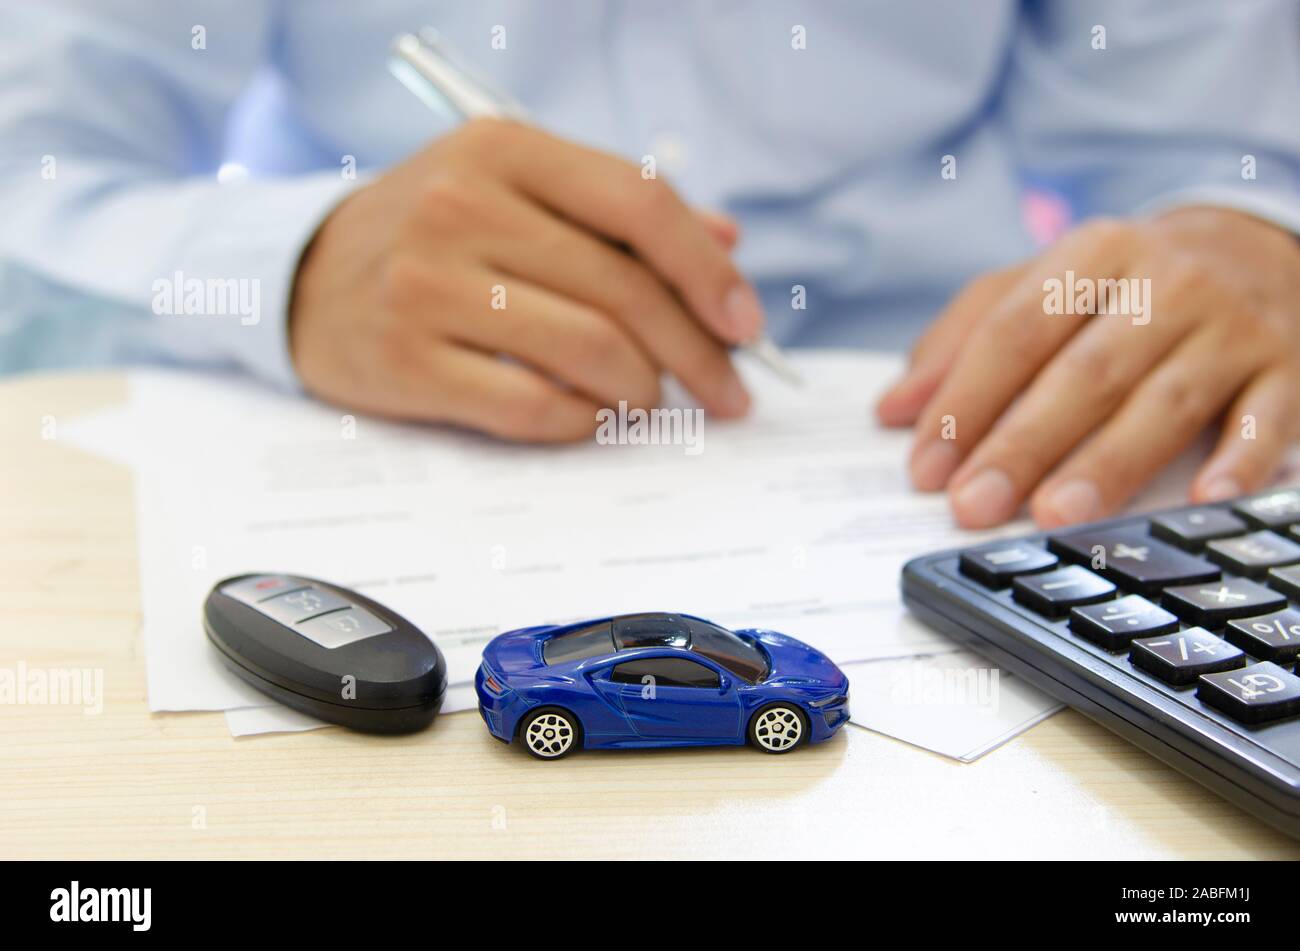 Toy car finance calculator, car keys and papers on the desk.car insurance concept Stock Photo